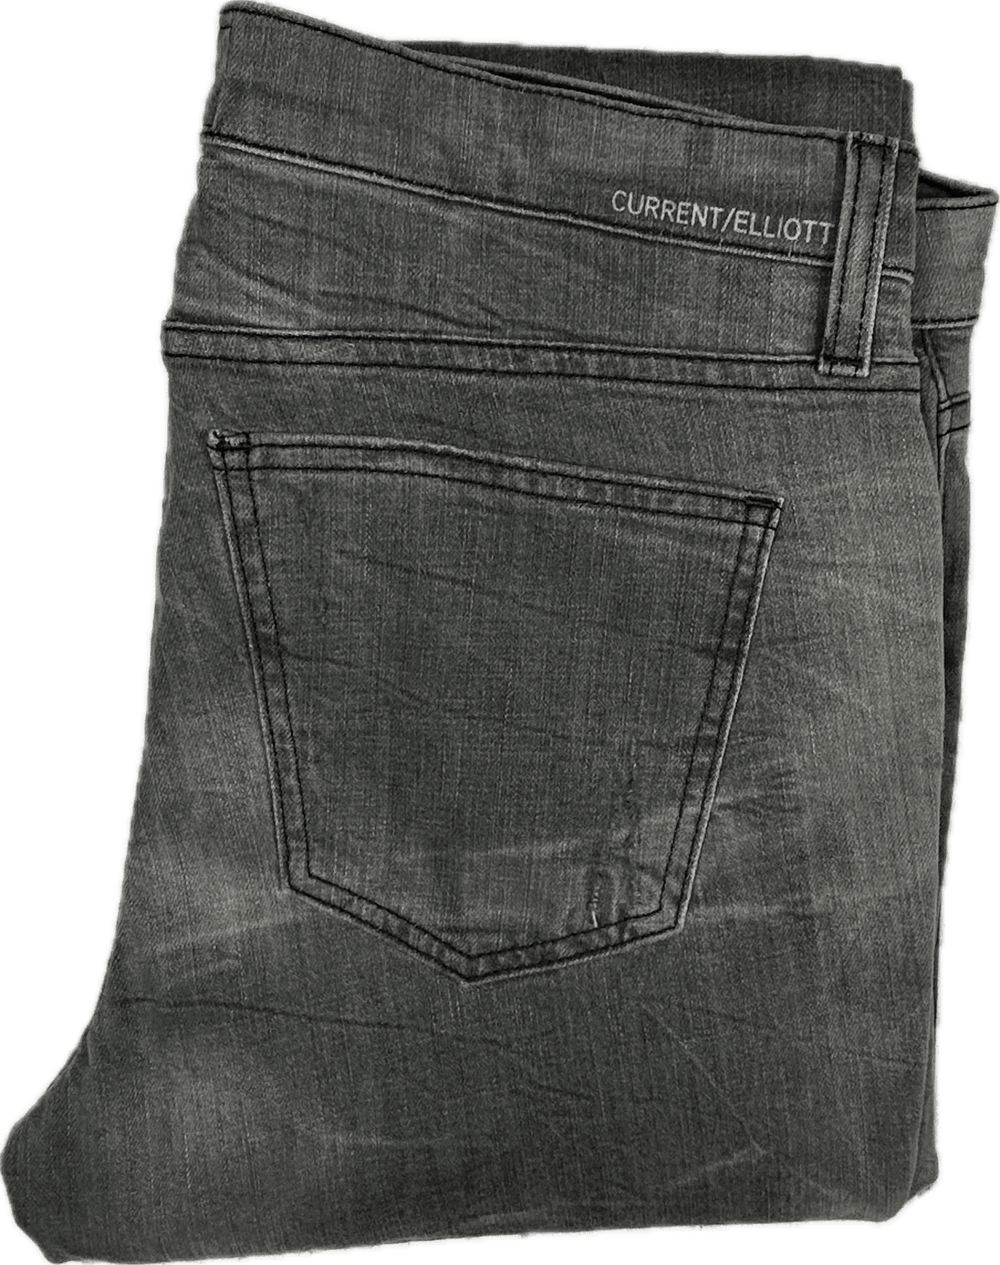 Current/Elliot 'The Ankle Skinny' Tunnel Wash Jeans- Size 32 - Jean Pool